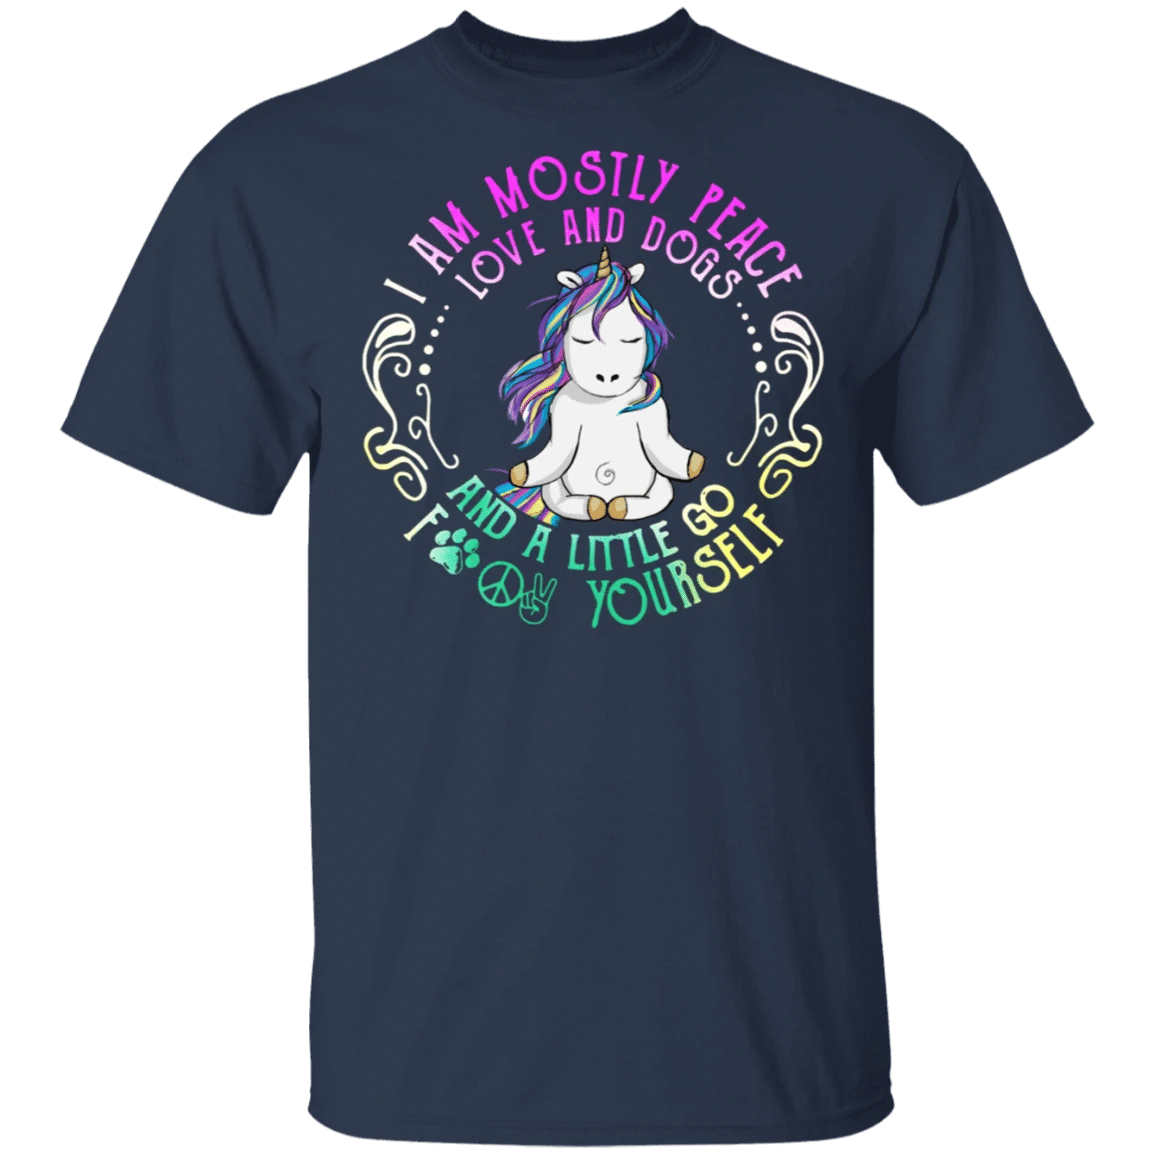 Unicorn Yoga I Am Mostly Peace Love And Dogs And A little Go Duck Yourself Shirt